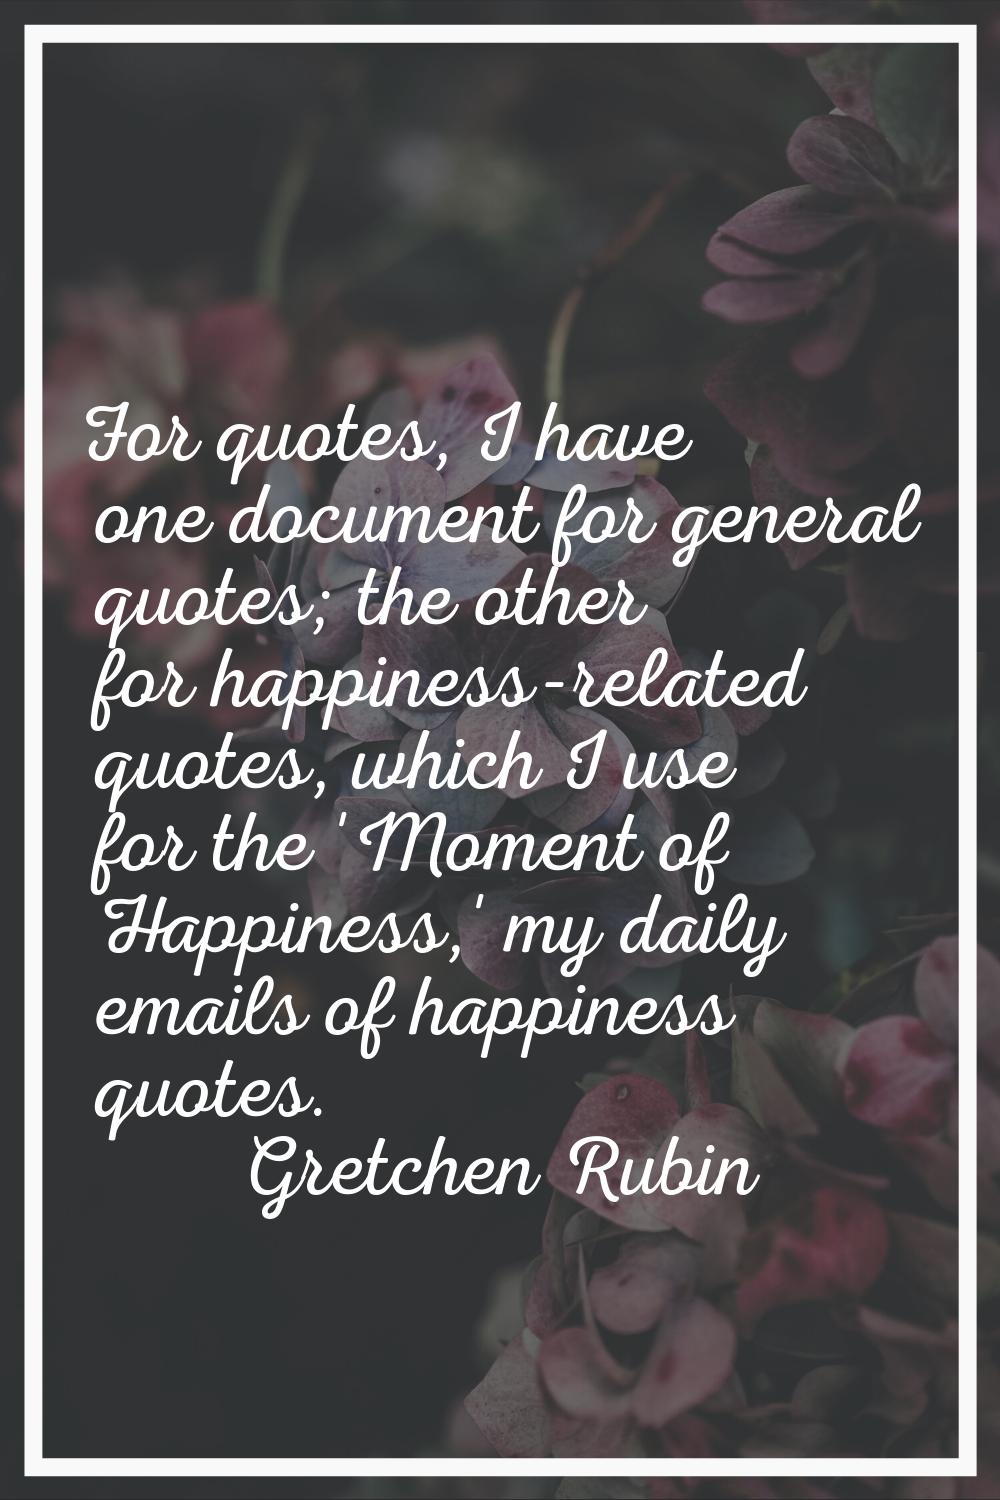 For quotes, I have one document for general quotes; the other for happiness-related quotes, which I